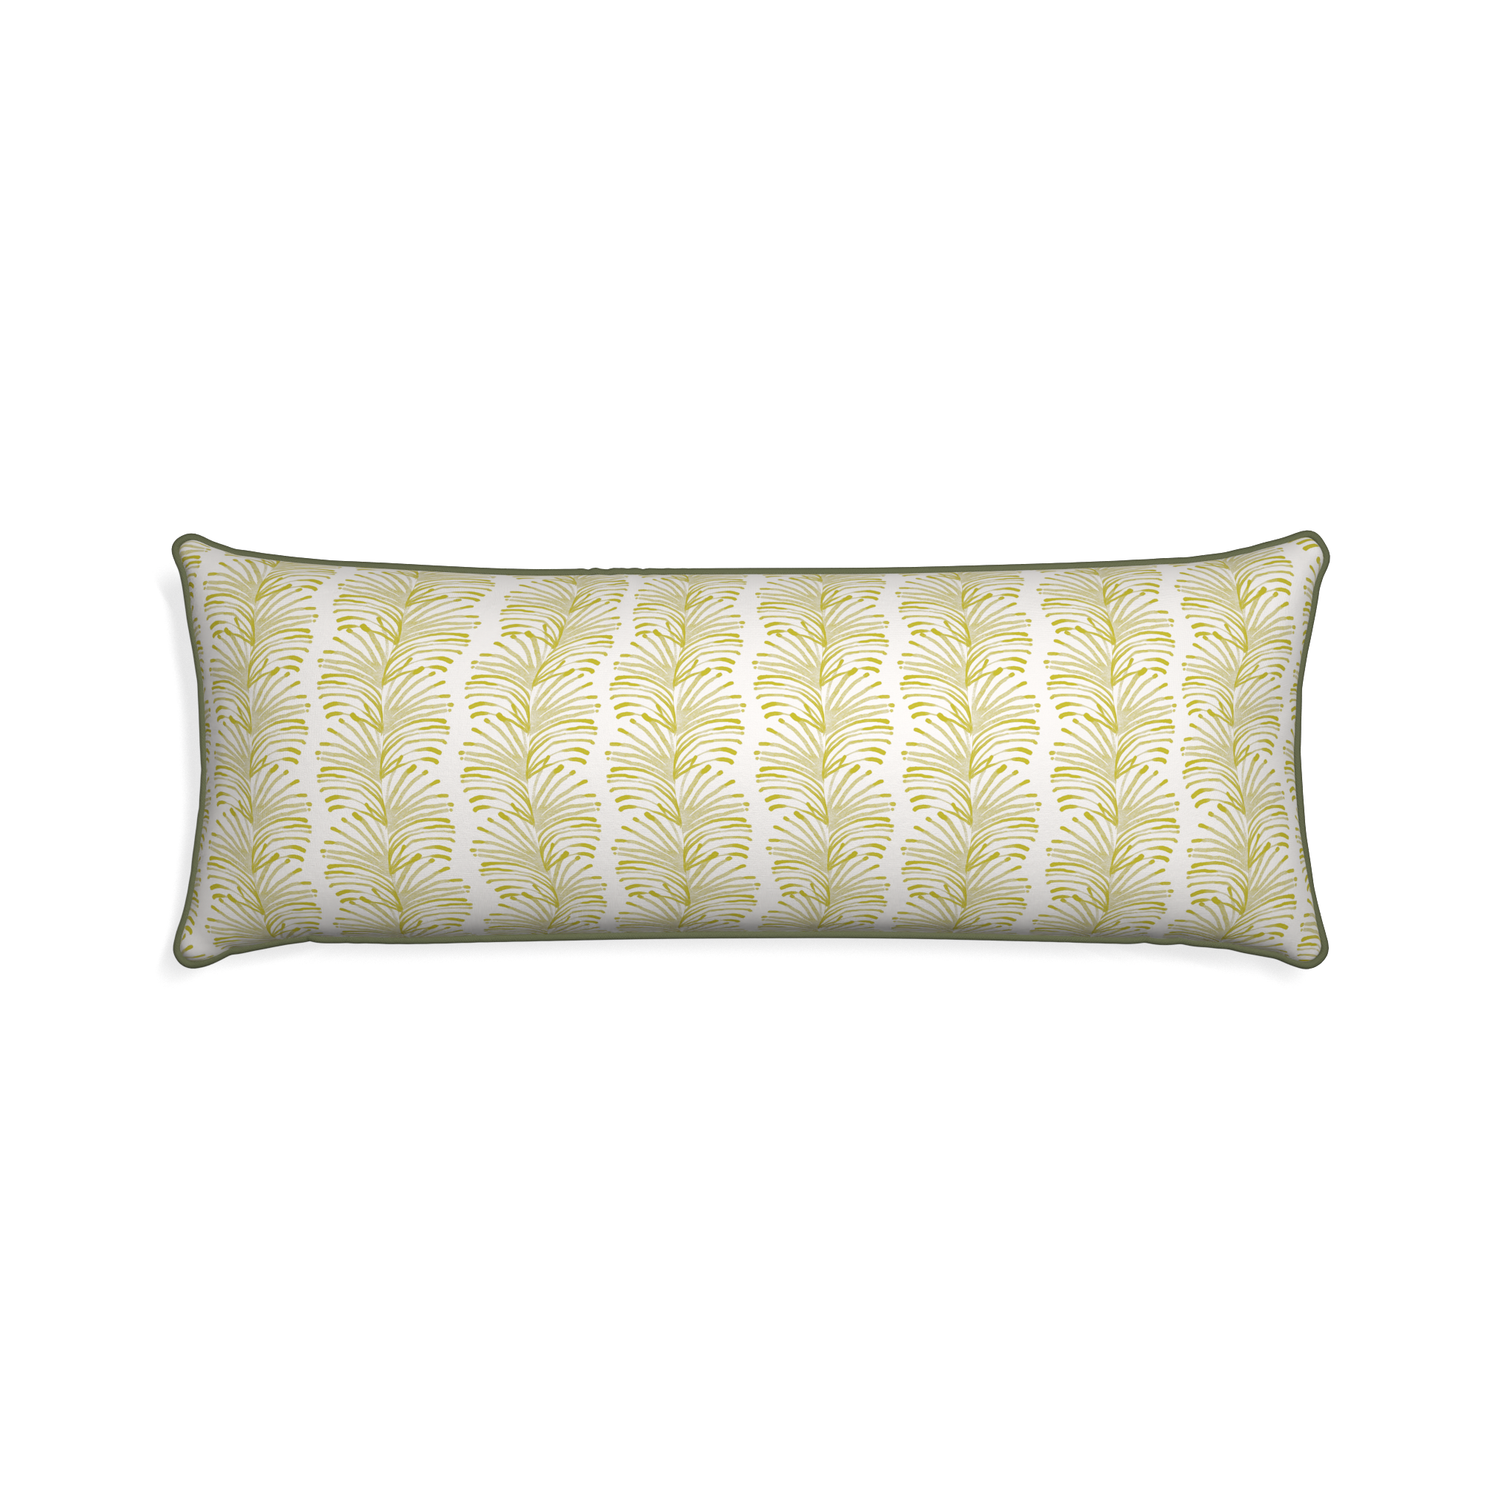 Xl-lumbar emma chartreuse custom yellow stripe chartreusepillow with f piping on white background